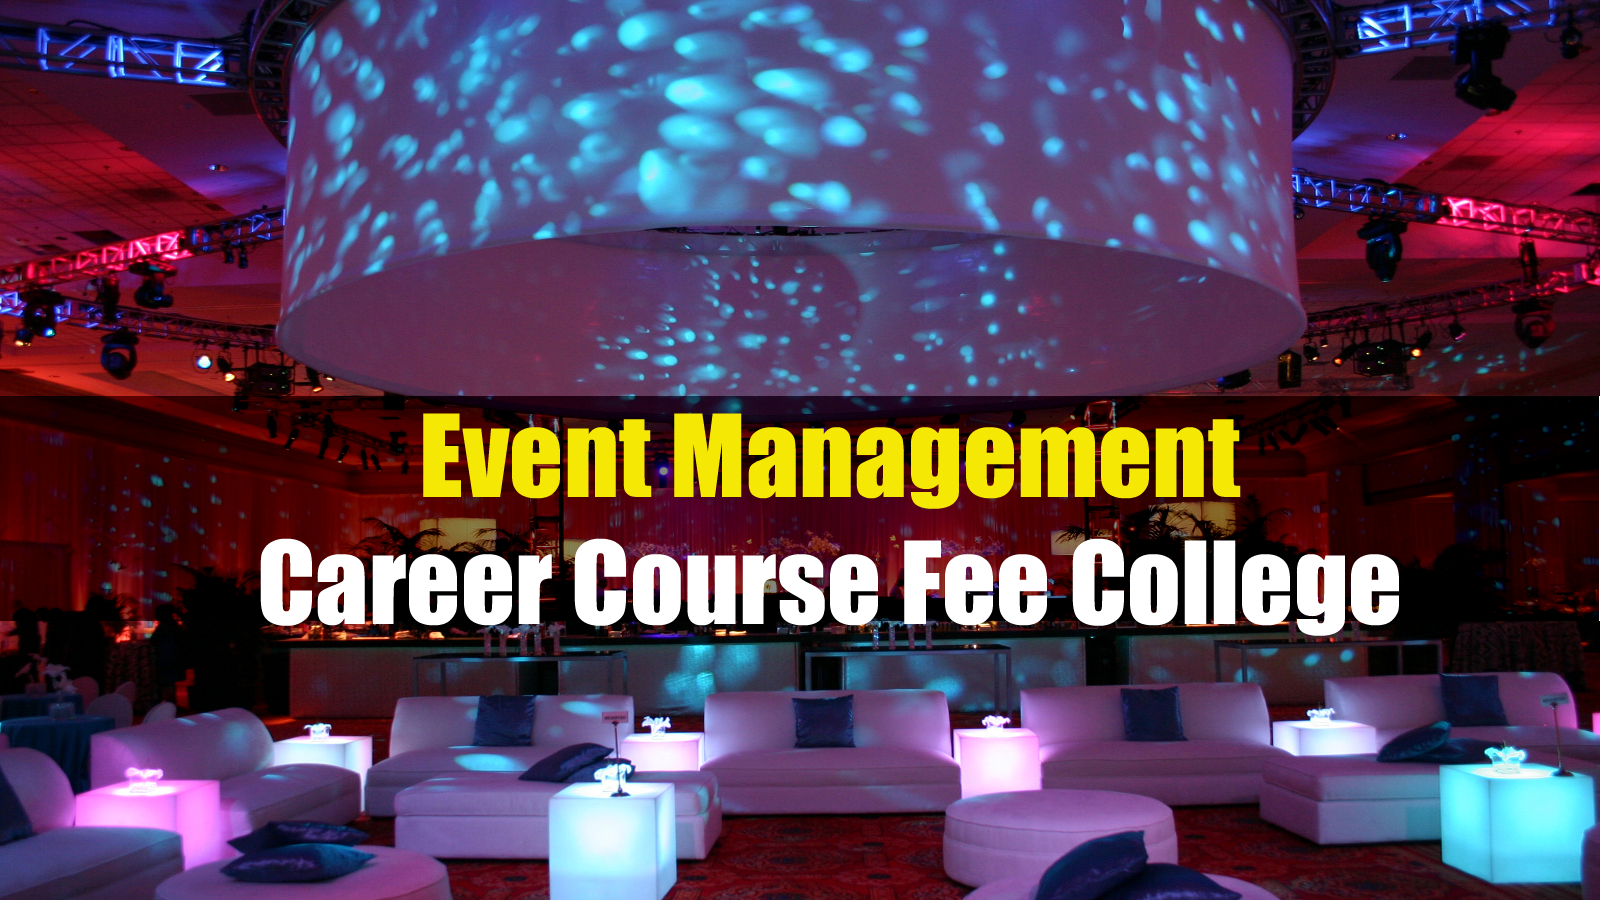 Event Management Career Course Fee College